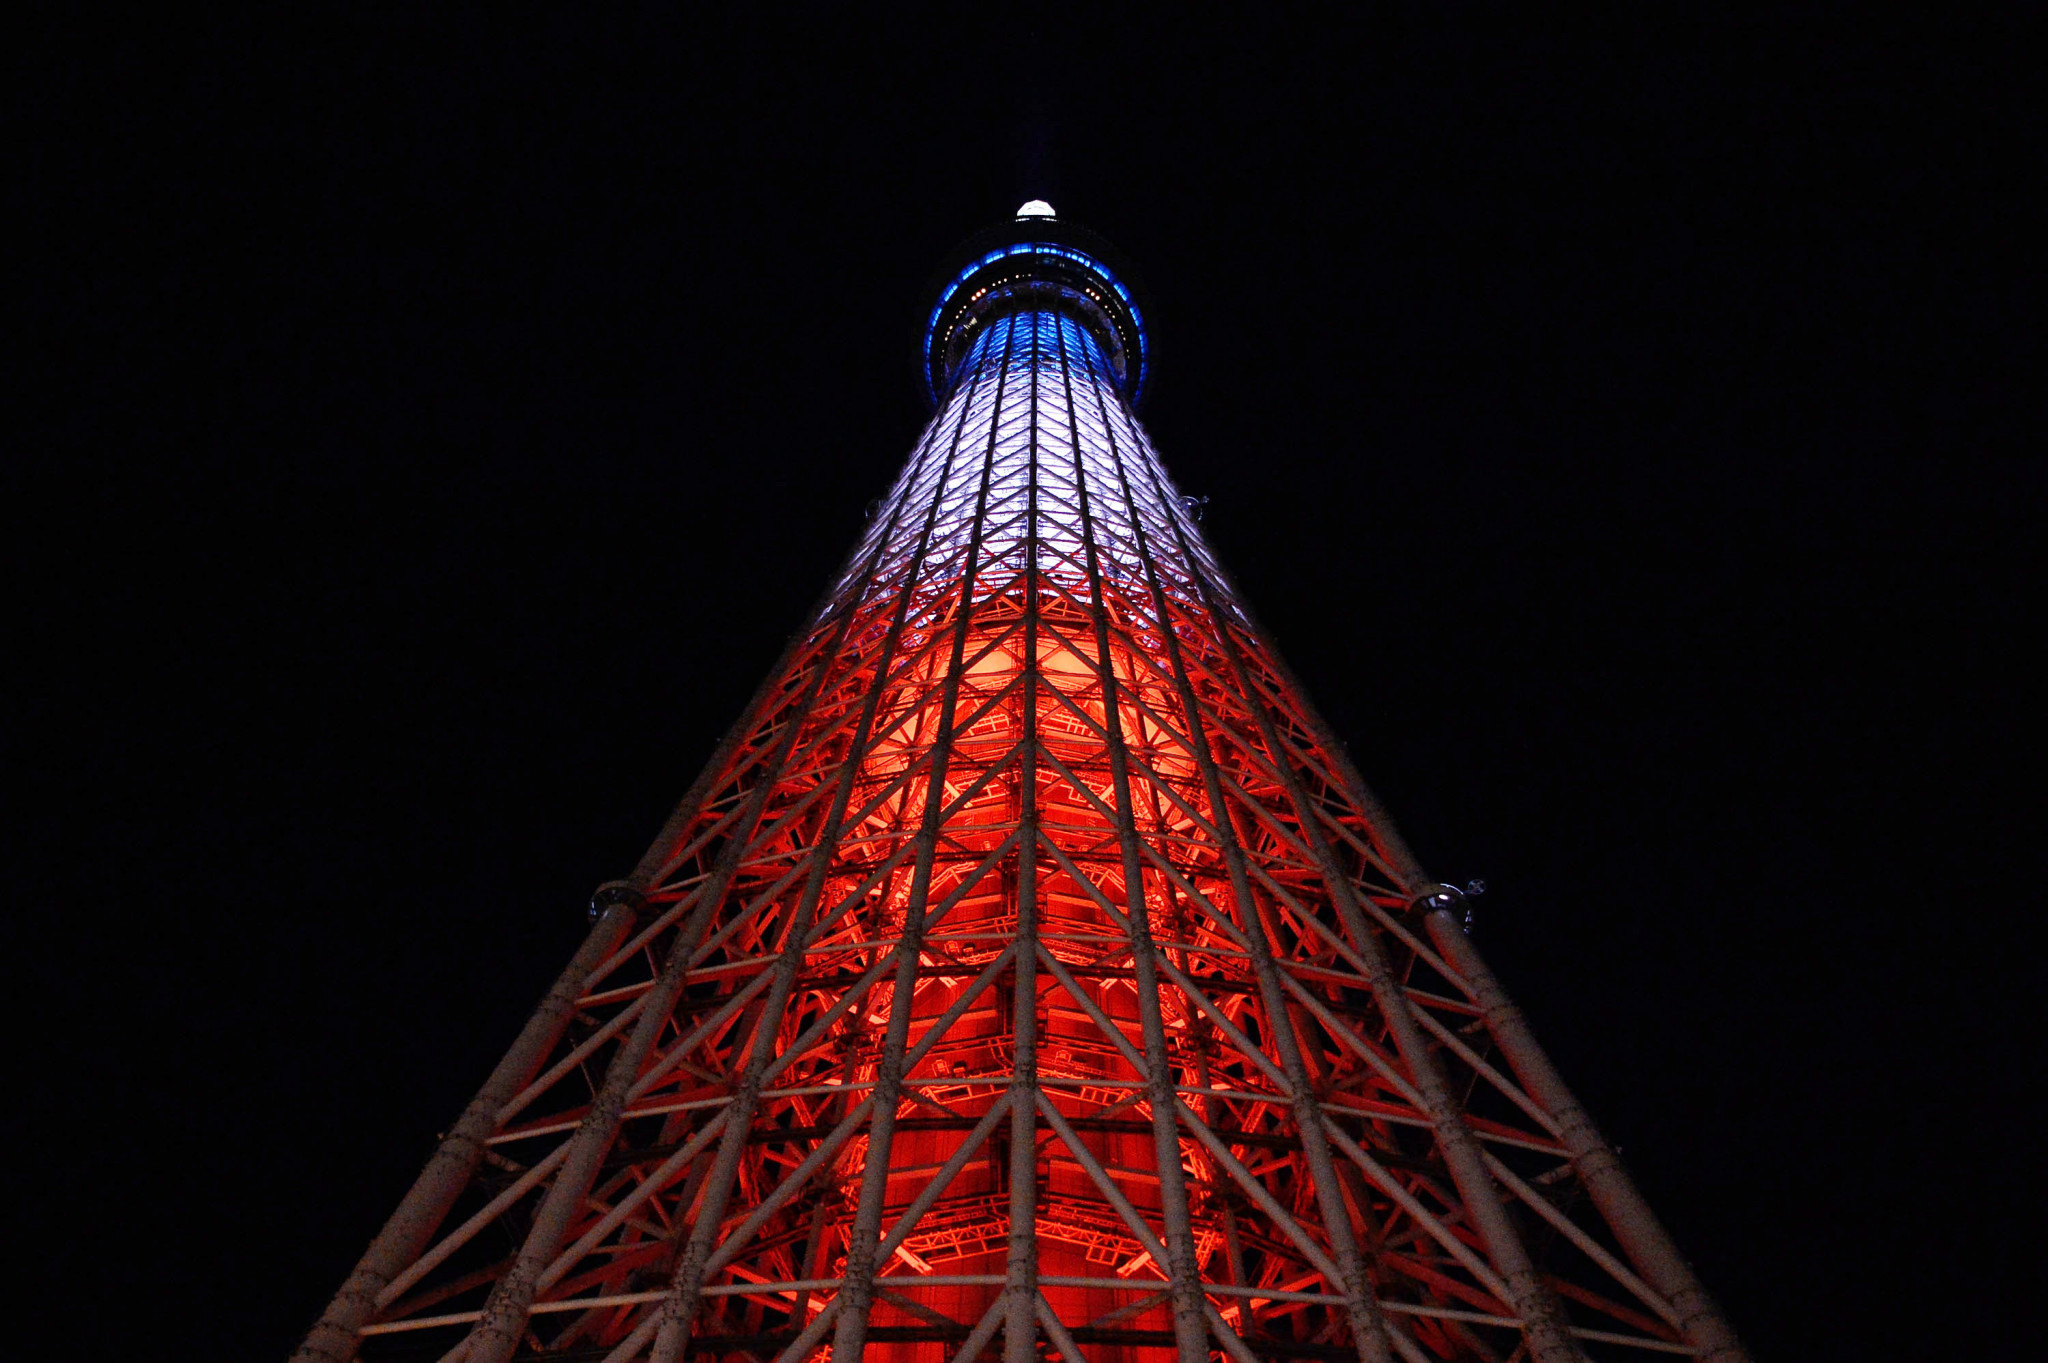 The Tokyo leg of the Olympic Torch Relay will include a visit to the Skytree observation deck ©Getty Images